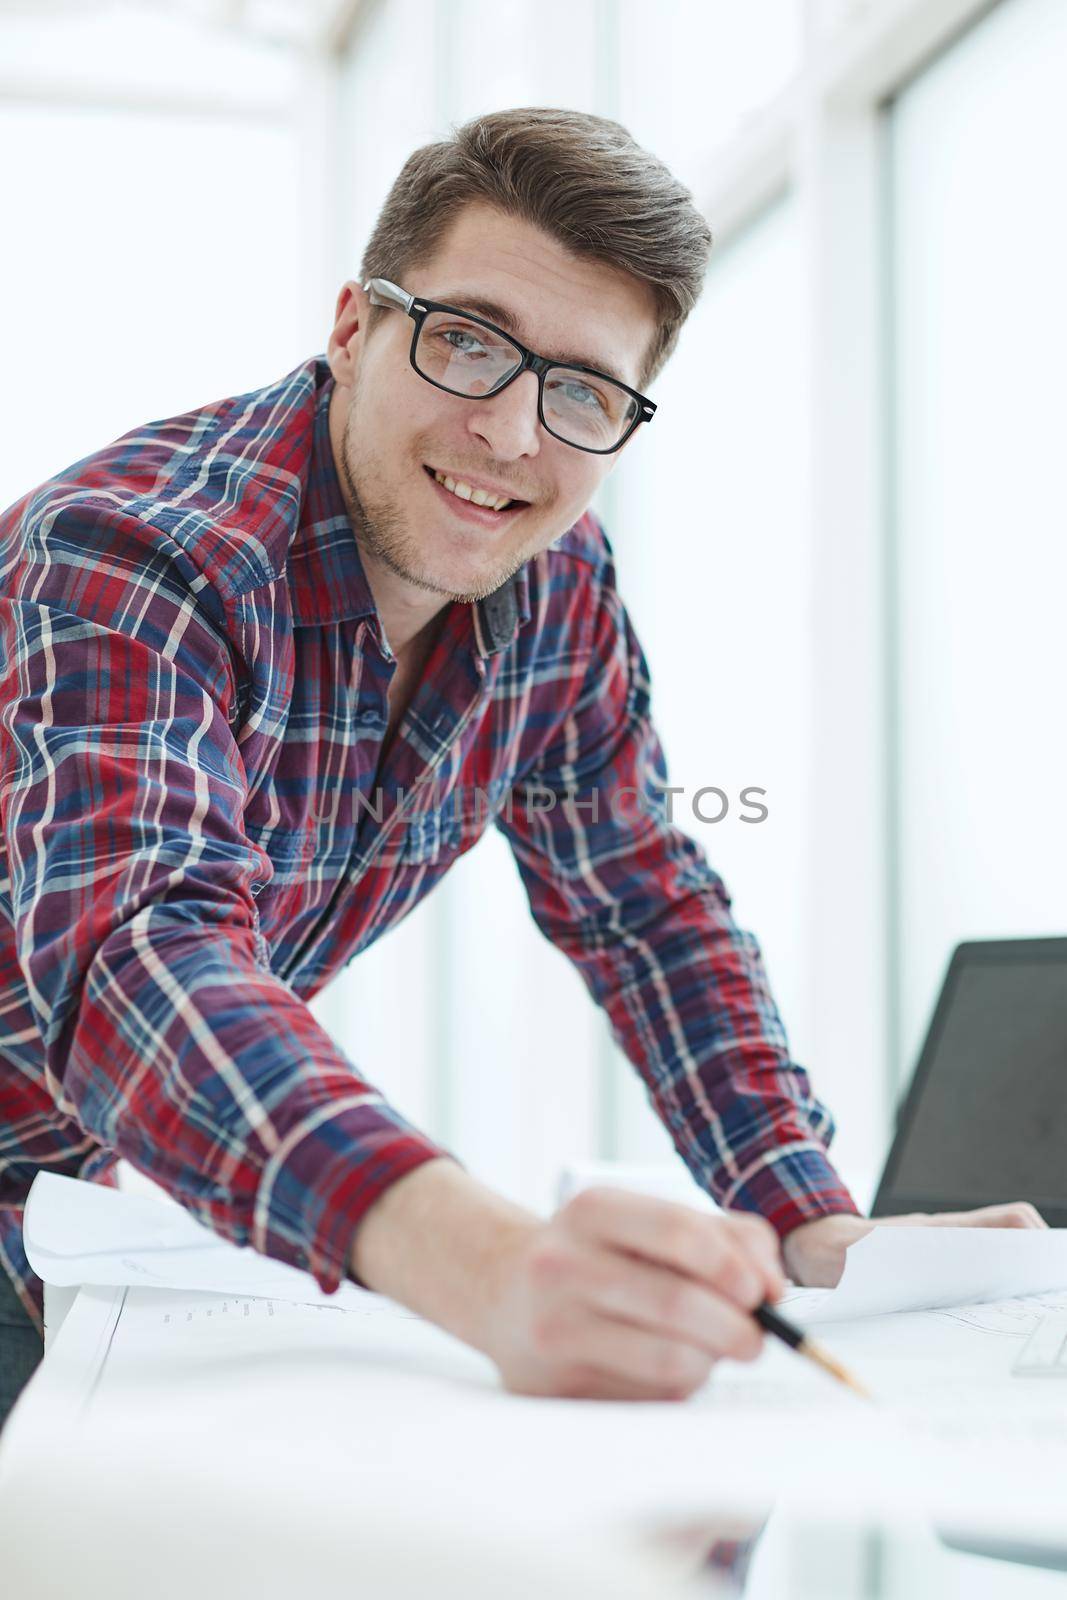 Rear view of a young businessman using laptop at office desk